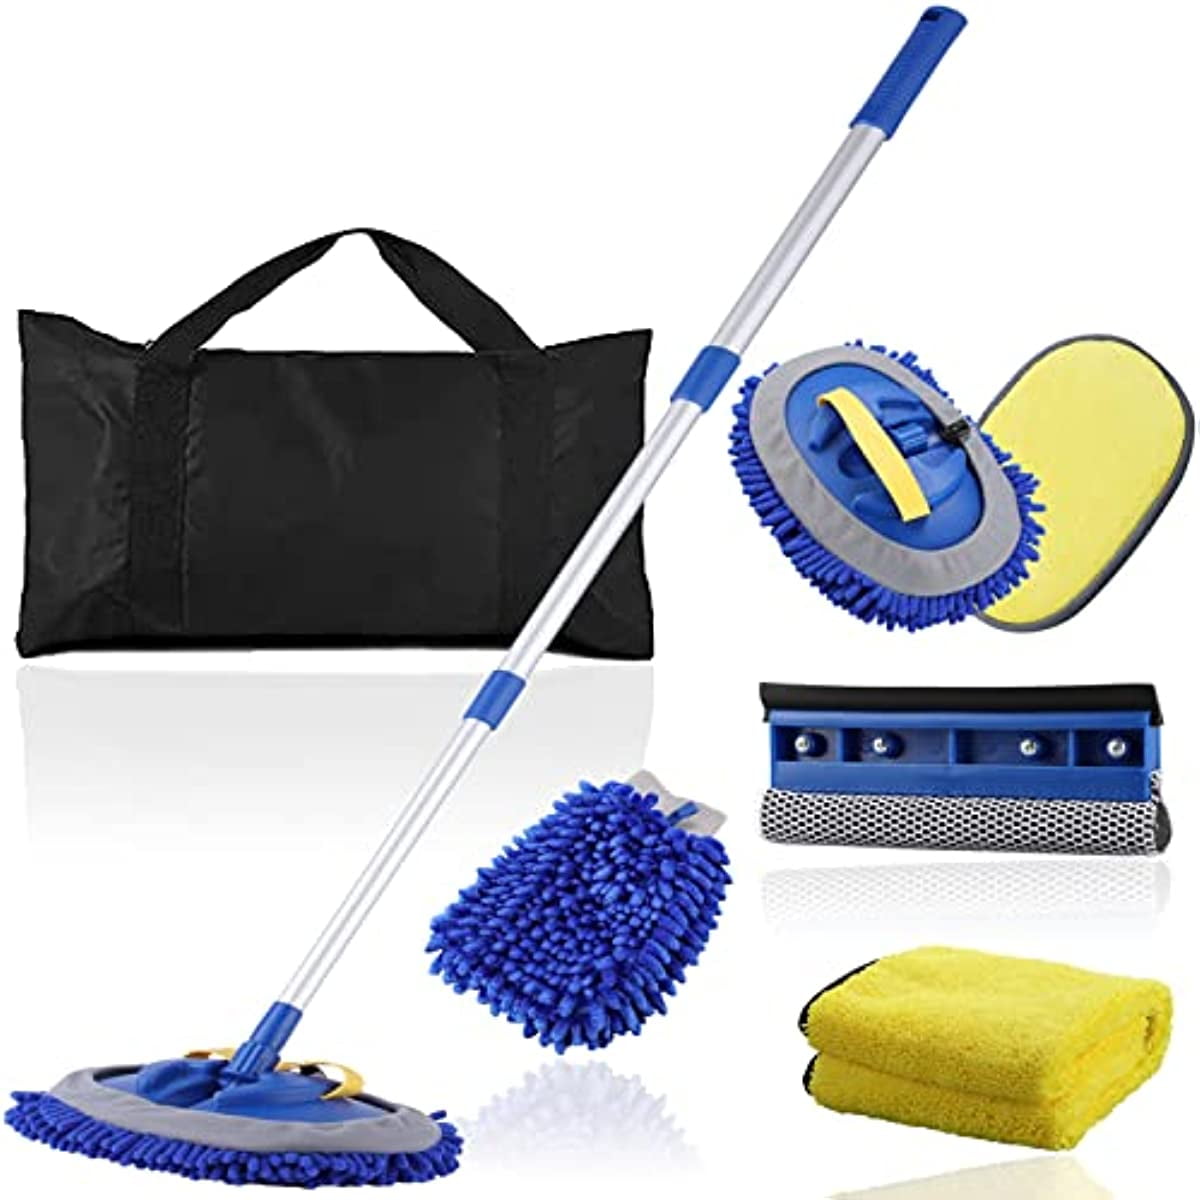 CAR INTERIOR CLEANING KIT Sets With Brush Mop Microfiber Towels HAIPHAIK